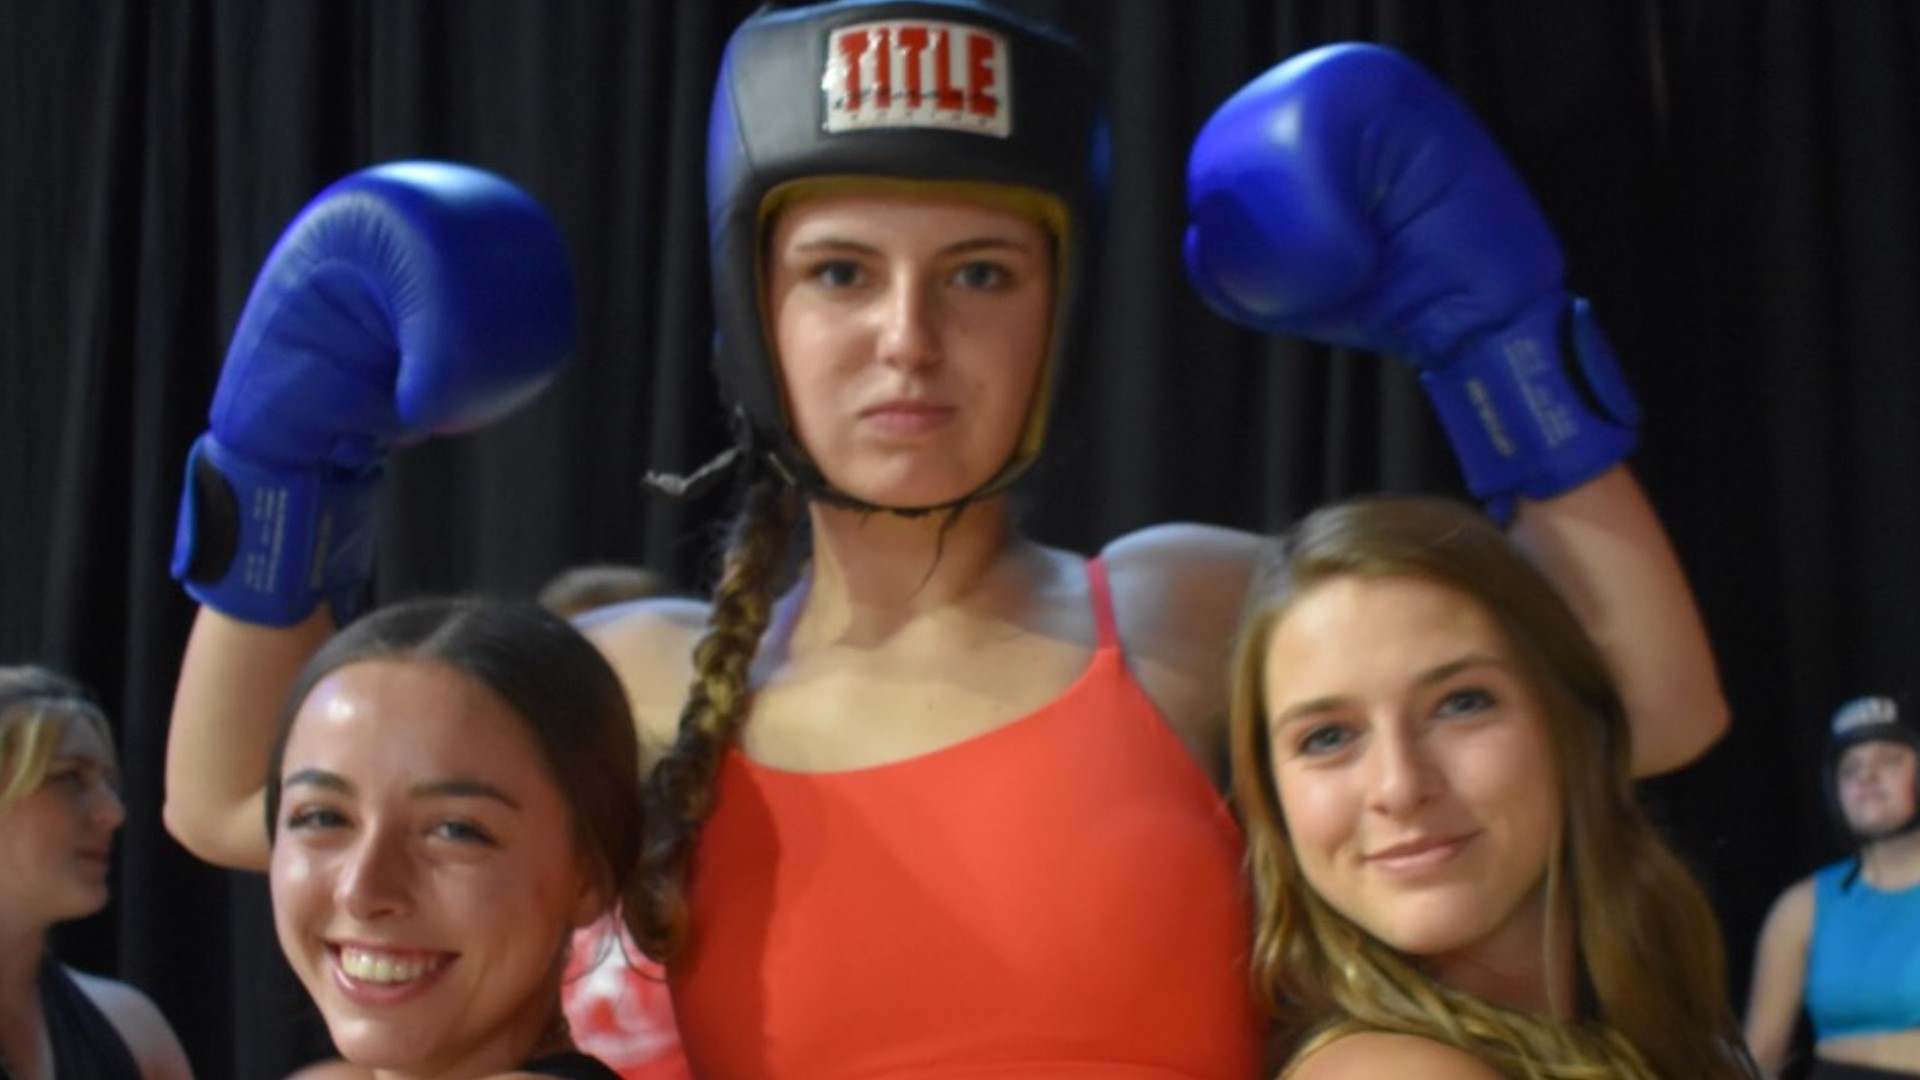 20-year-old Ariana Zarse participated in a boxing championship earlier this month, helping raise more than $20,000 to charities. She died Saturday morning.